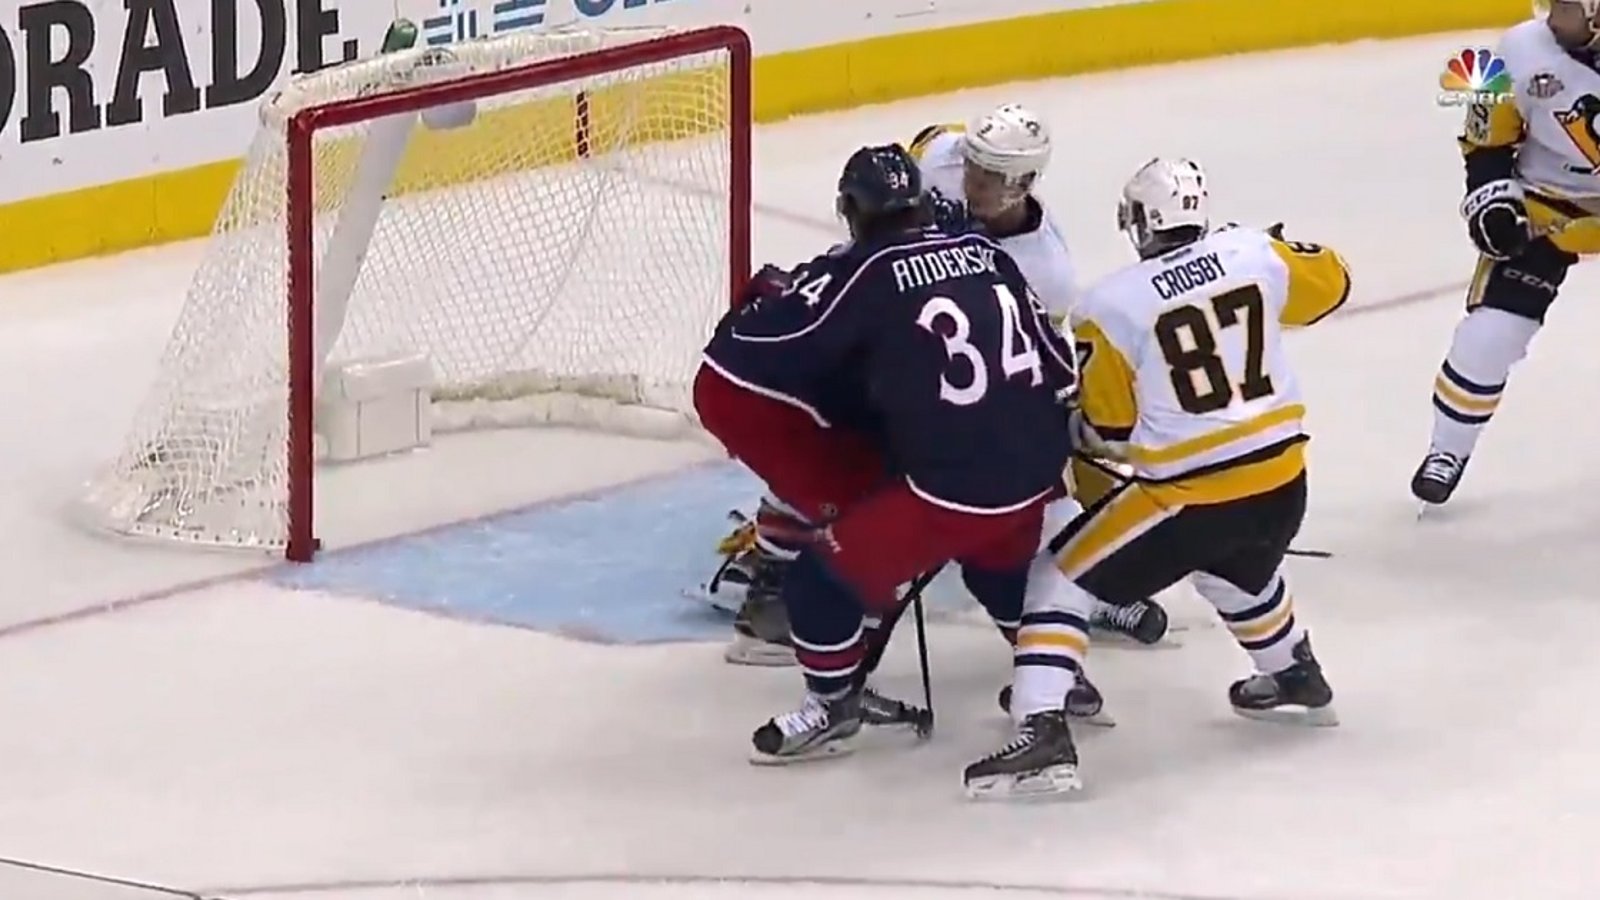 Sidney Crosby gives the Blue Jackets a 1-0 lead.